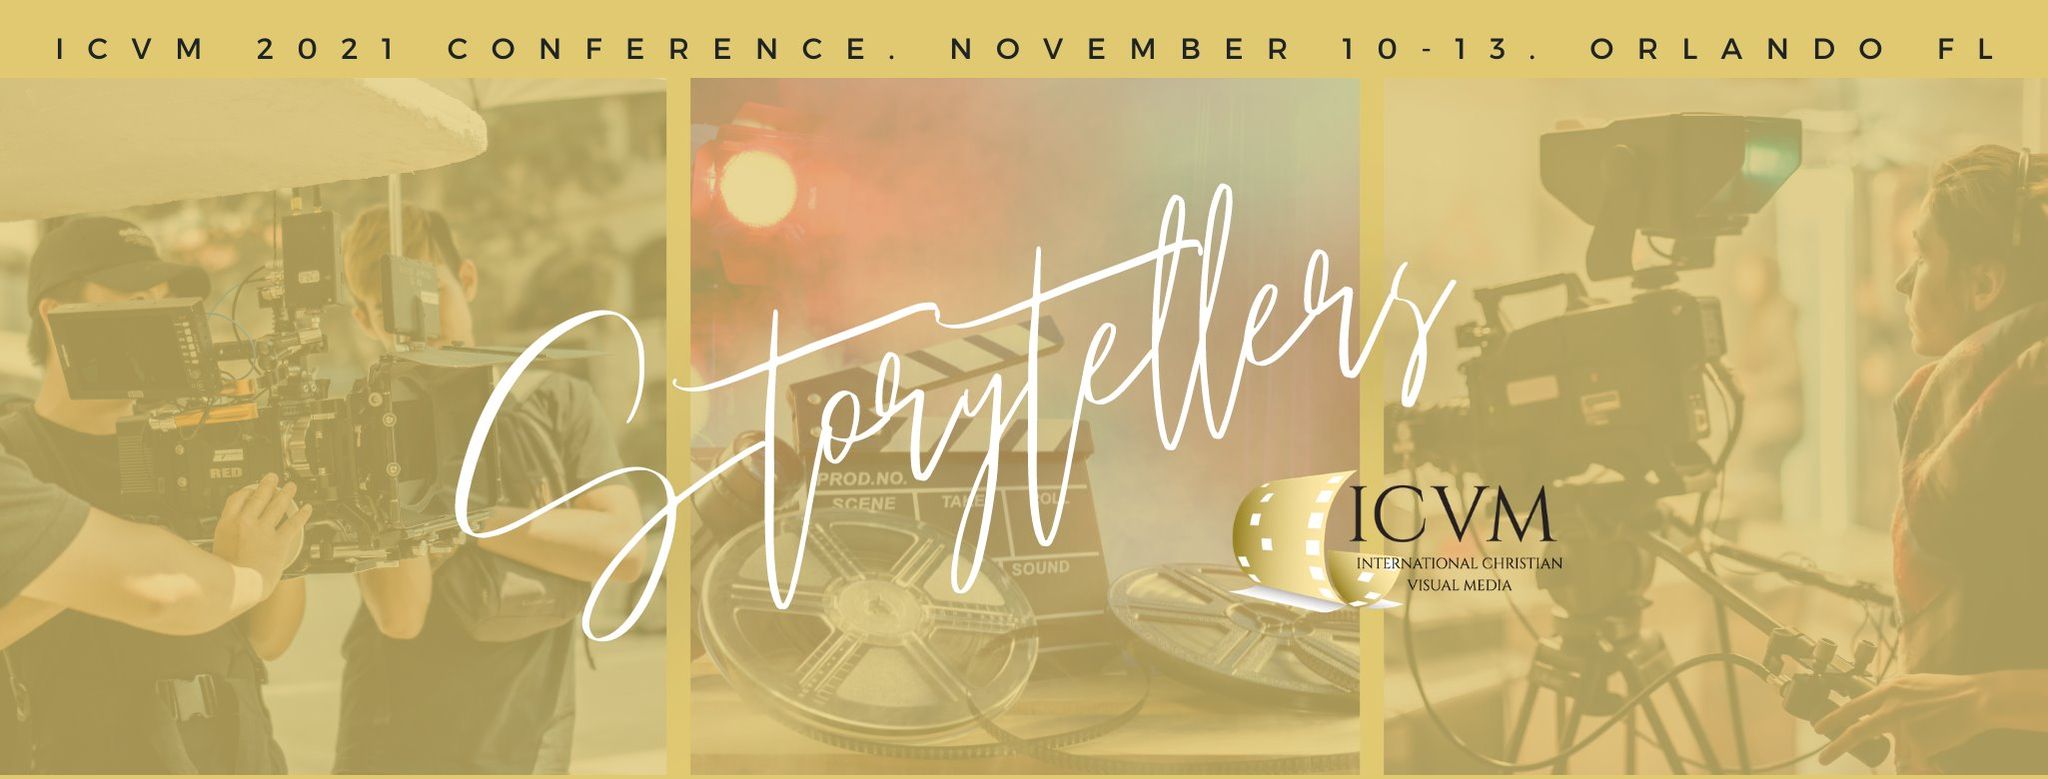 ICVM Storyteller's Conference